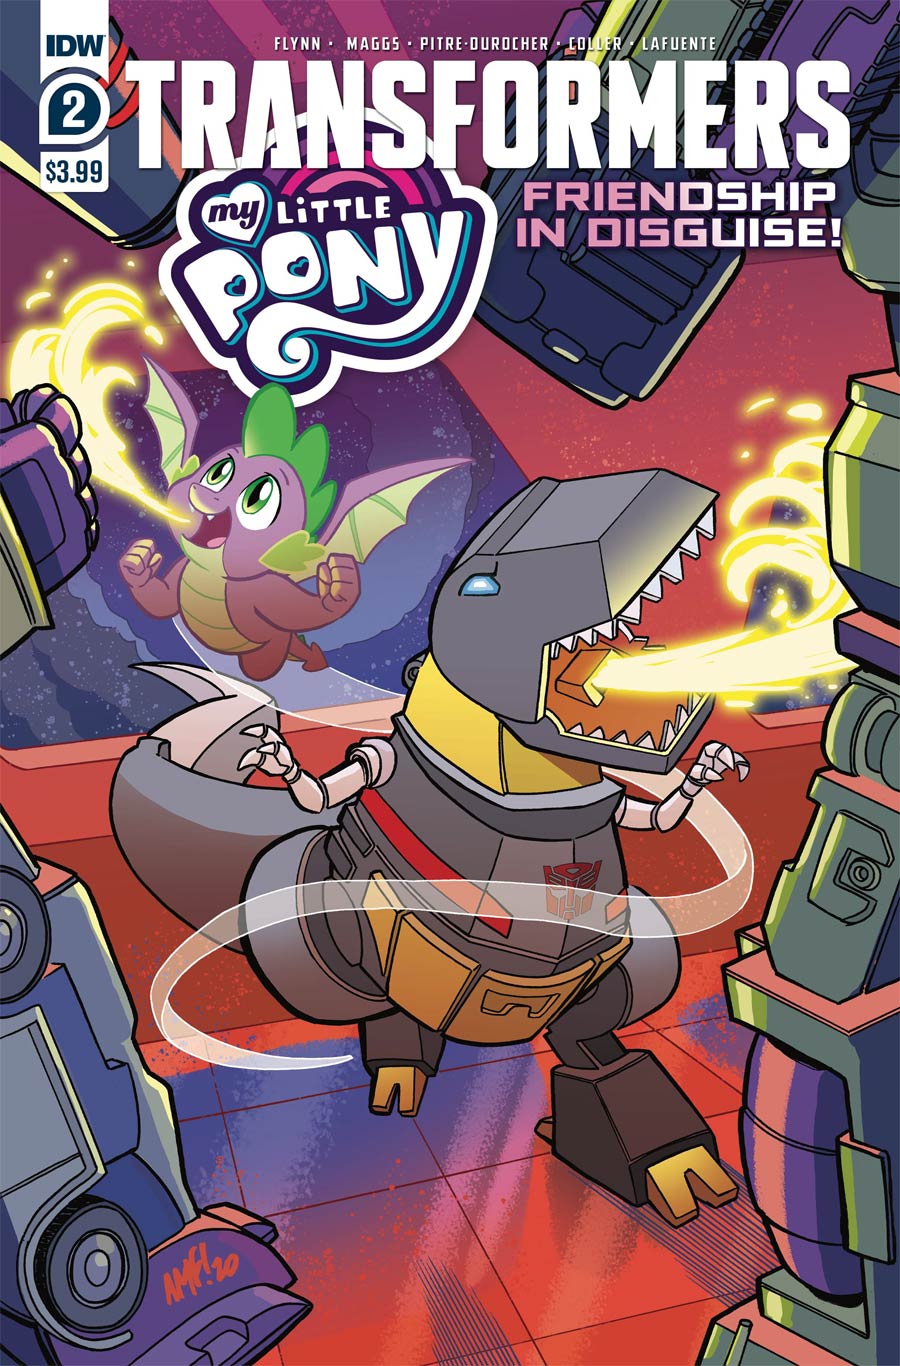 Transformers/My Little Pony: Friendship in Disguise #2 (2020)